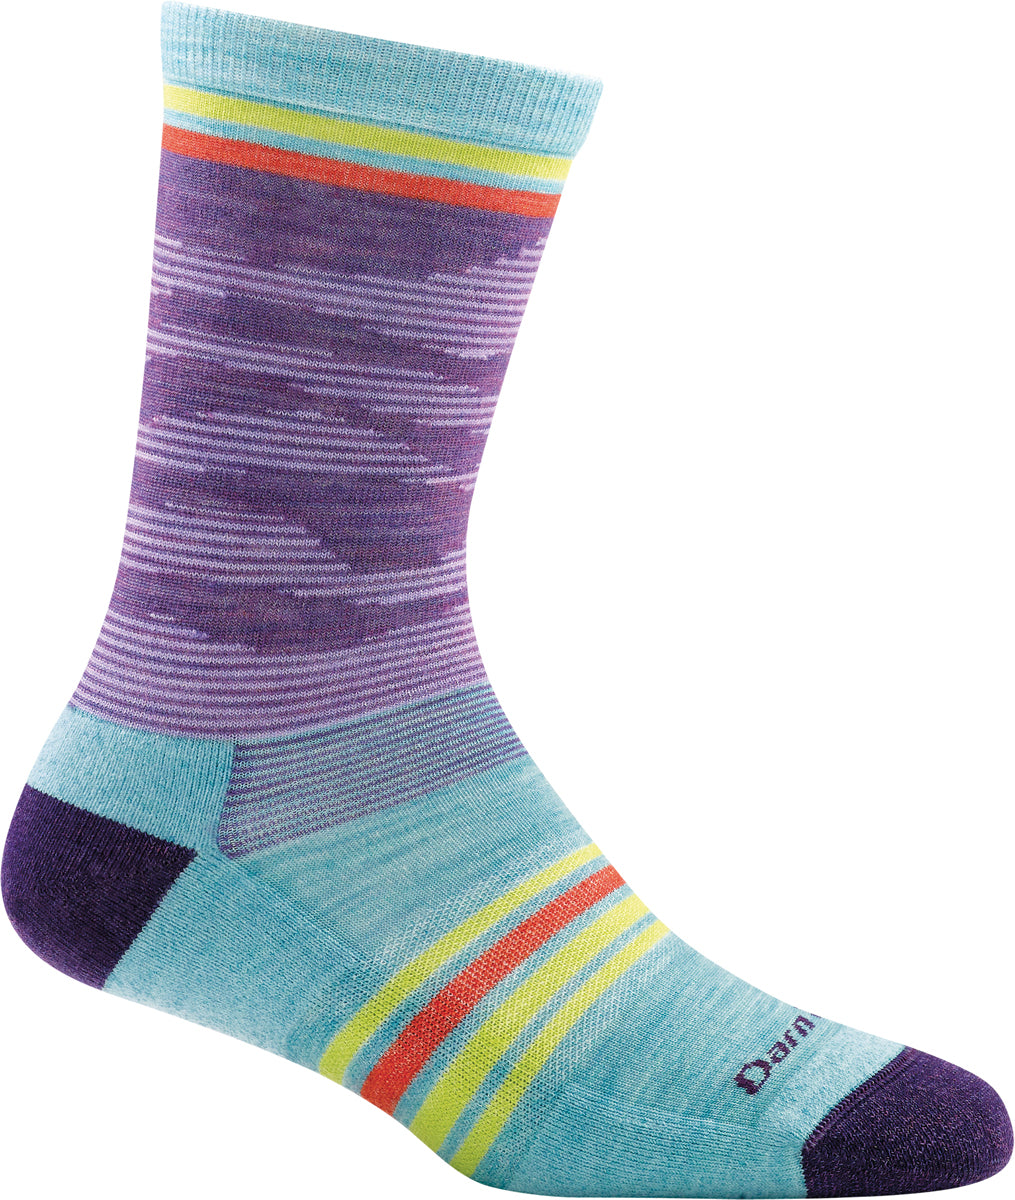 Women's Darn Tough Waves Crew Light Cushion Sock in Purple from the side view